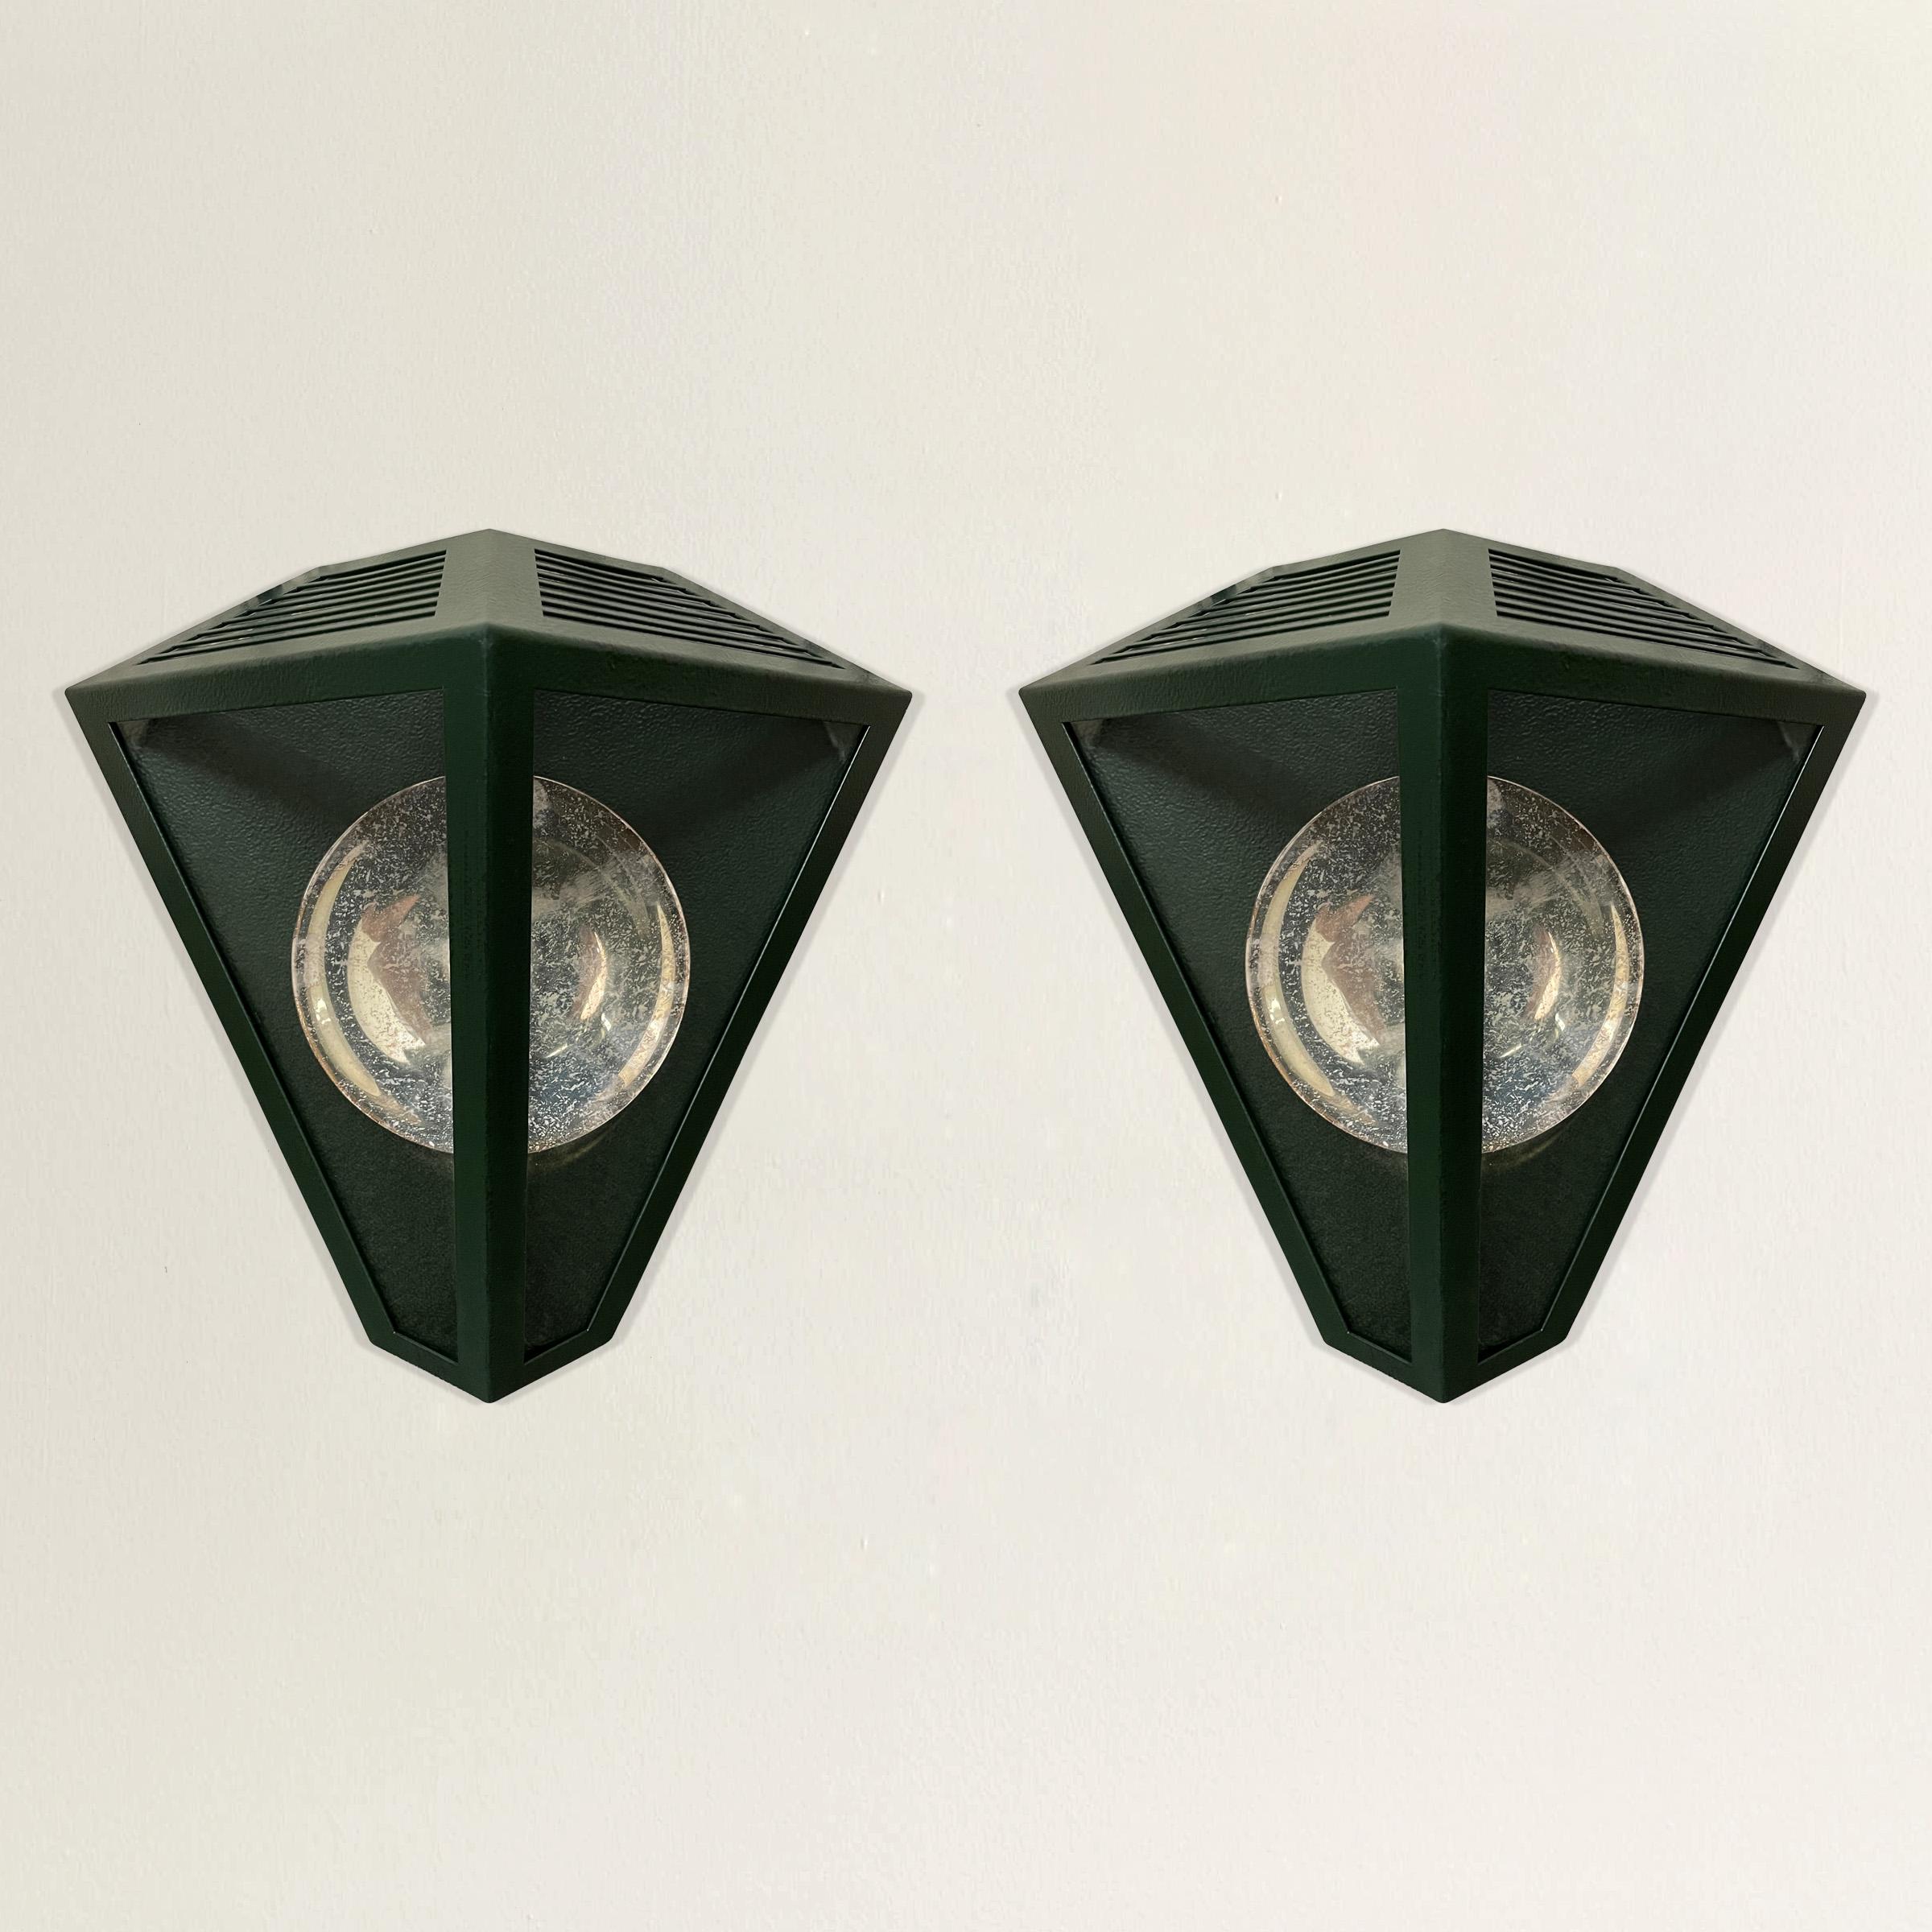 A striking pair of late 20th century American Rose Tarlow designed wall lanterns with a sophisticated emerald green painted finish, and silver-plated reflectors. Wired for US; candelabra bulbs.